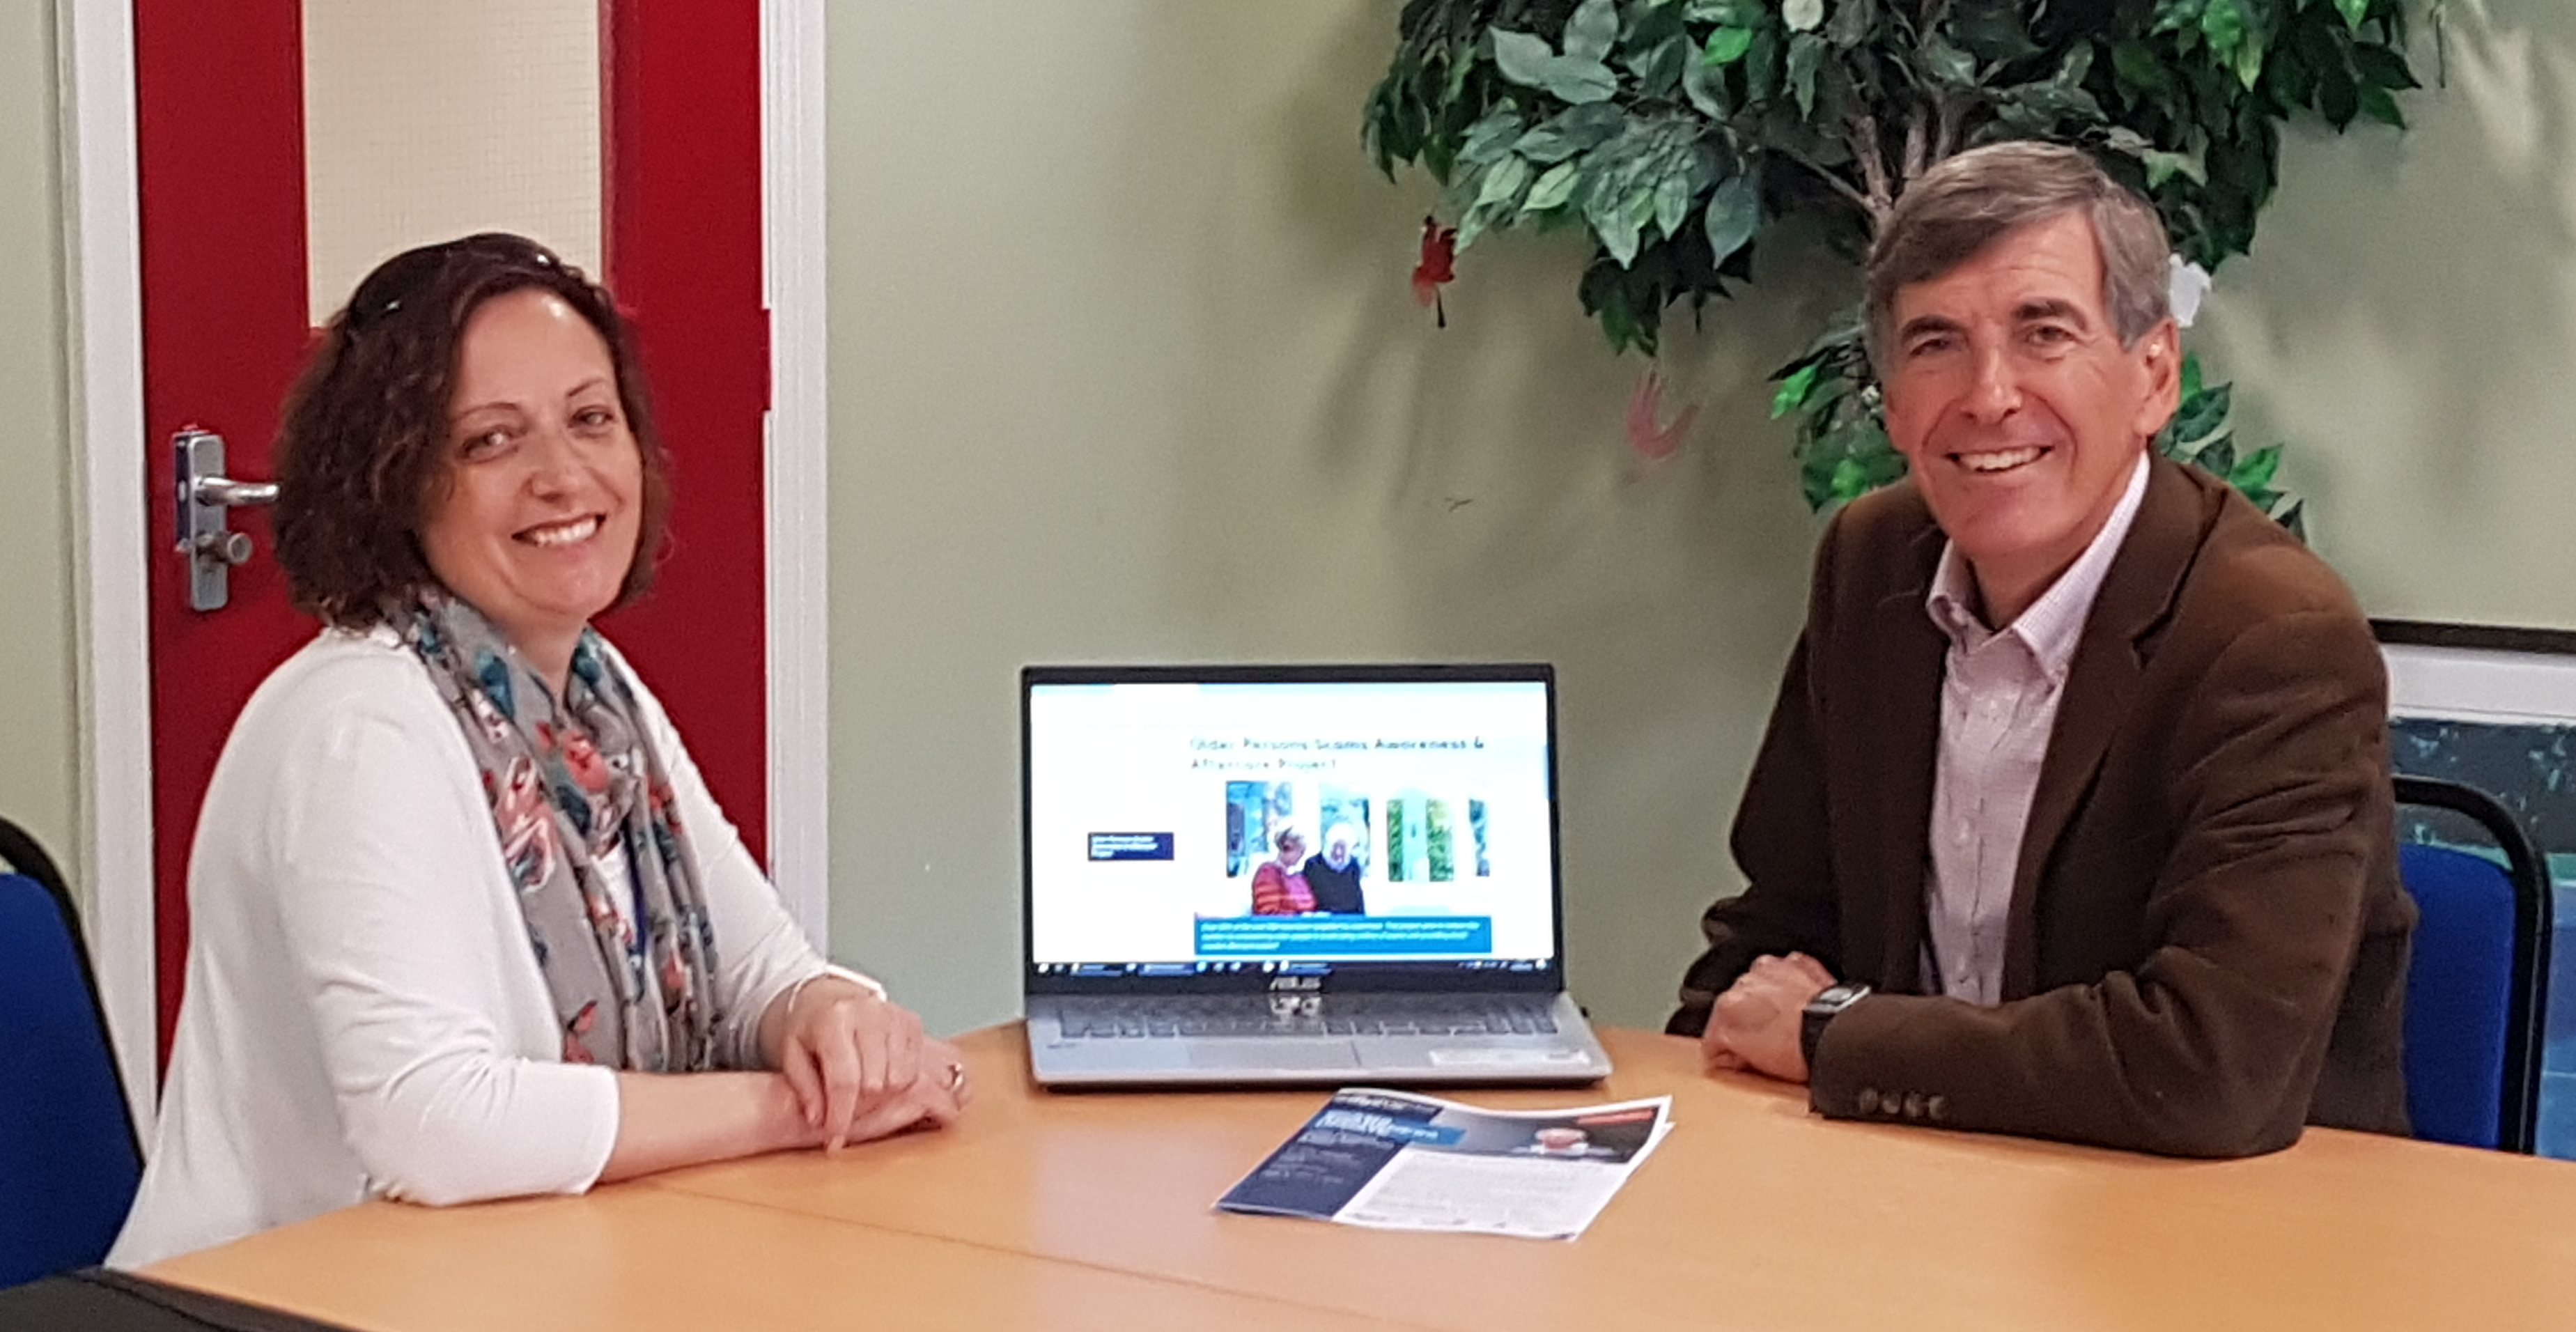 Our Scams Awareness Project Manager meeting with Macclesfield MP, David Rutley